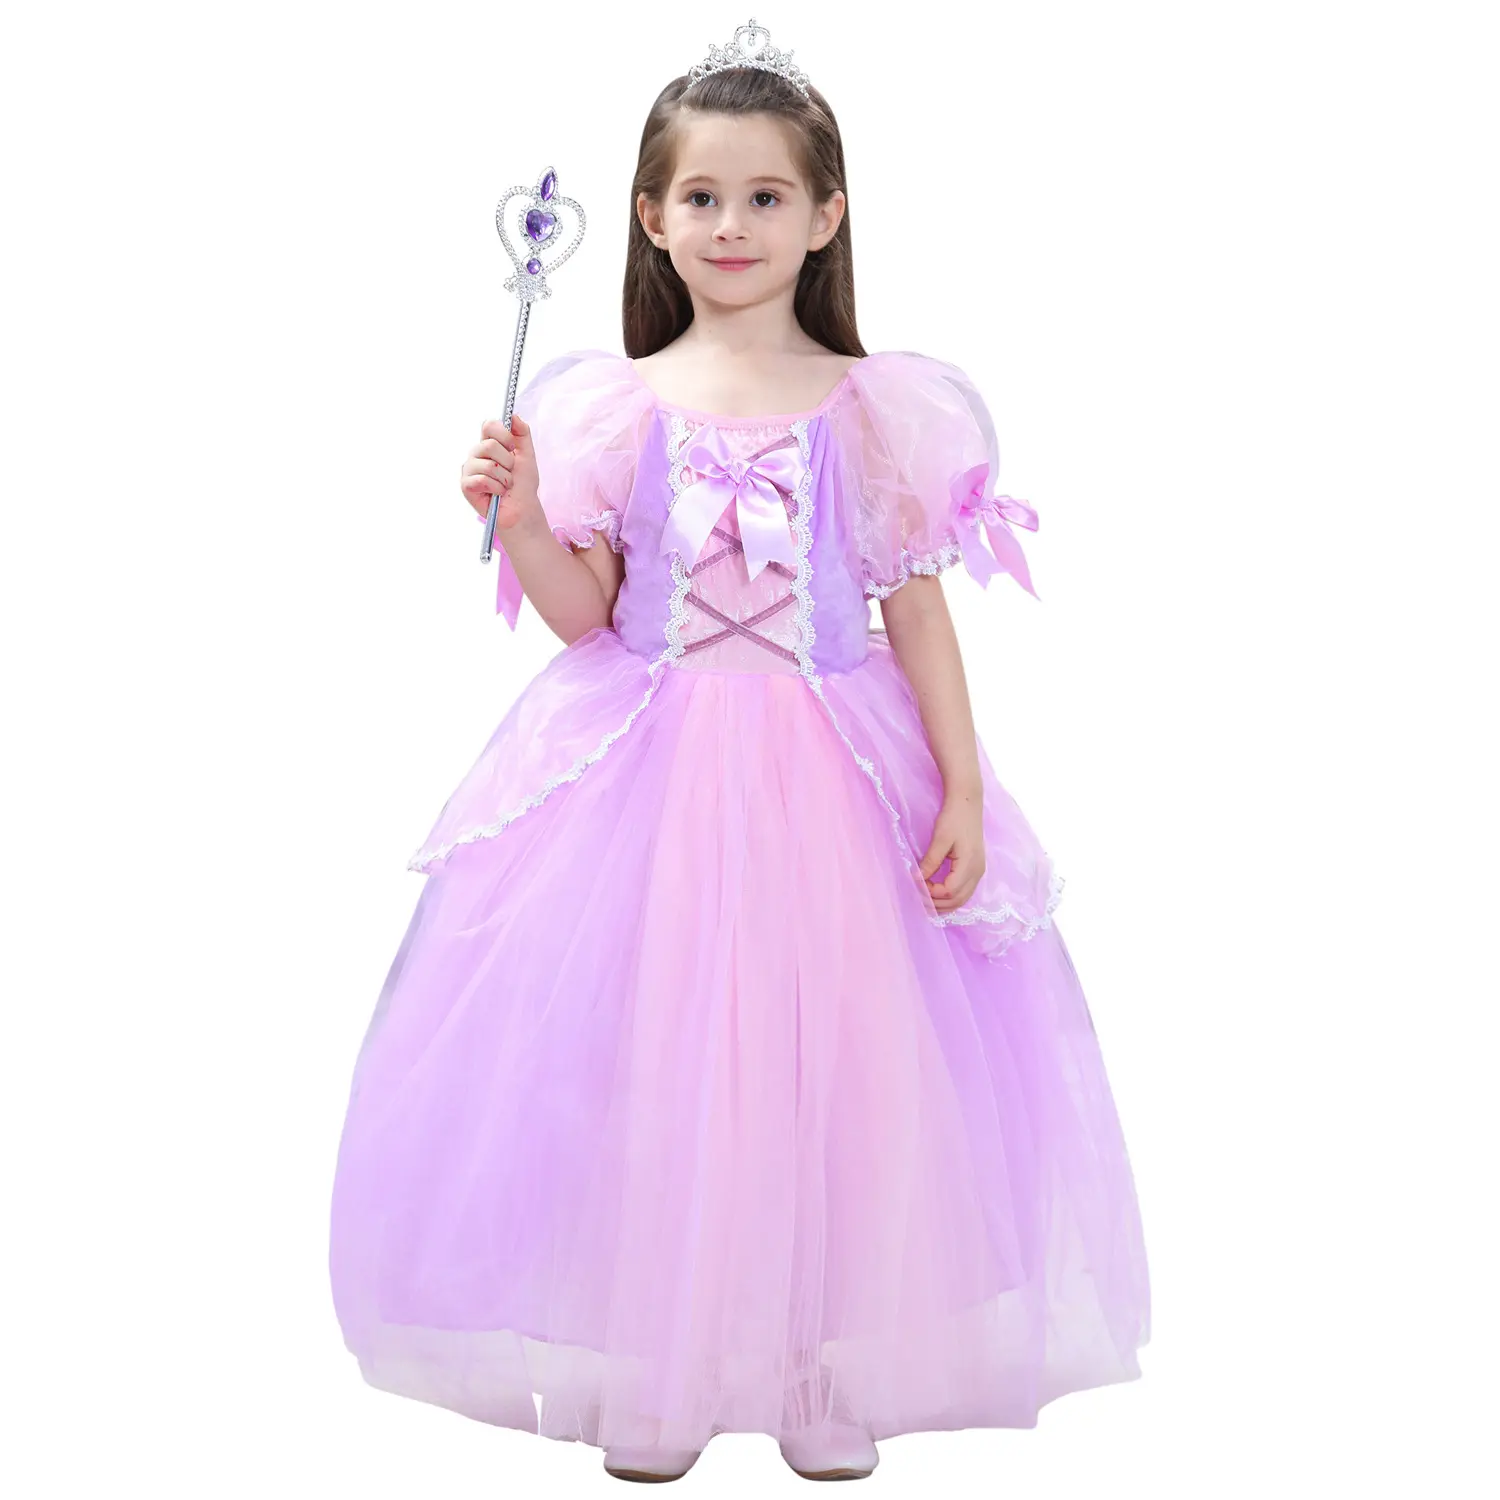 Toddler Girls Baby Sofia Dress Halloween Children Cosplay Clothes Party Role-play Frocks Kids Birthday Princess Costume